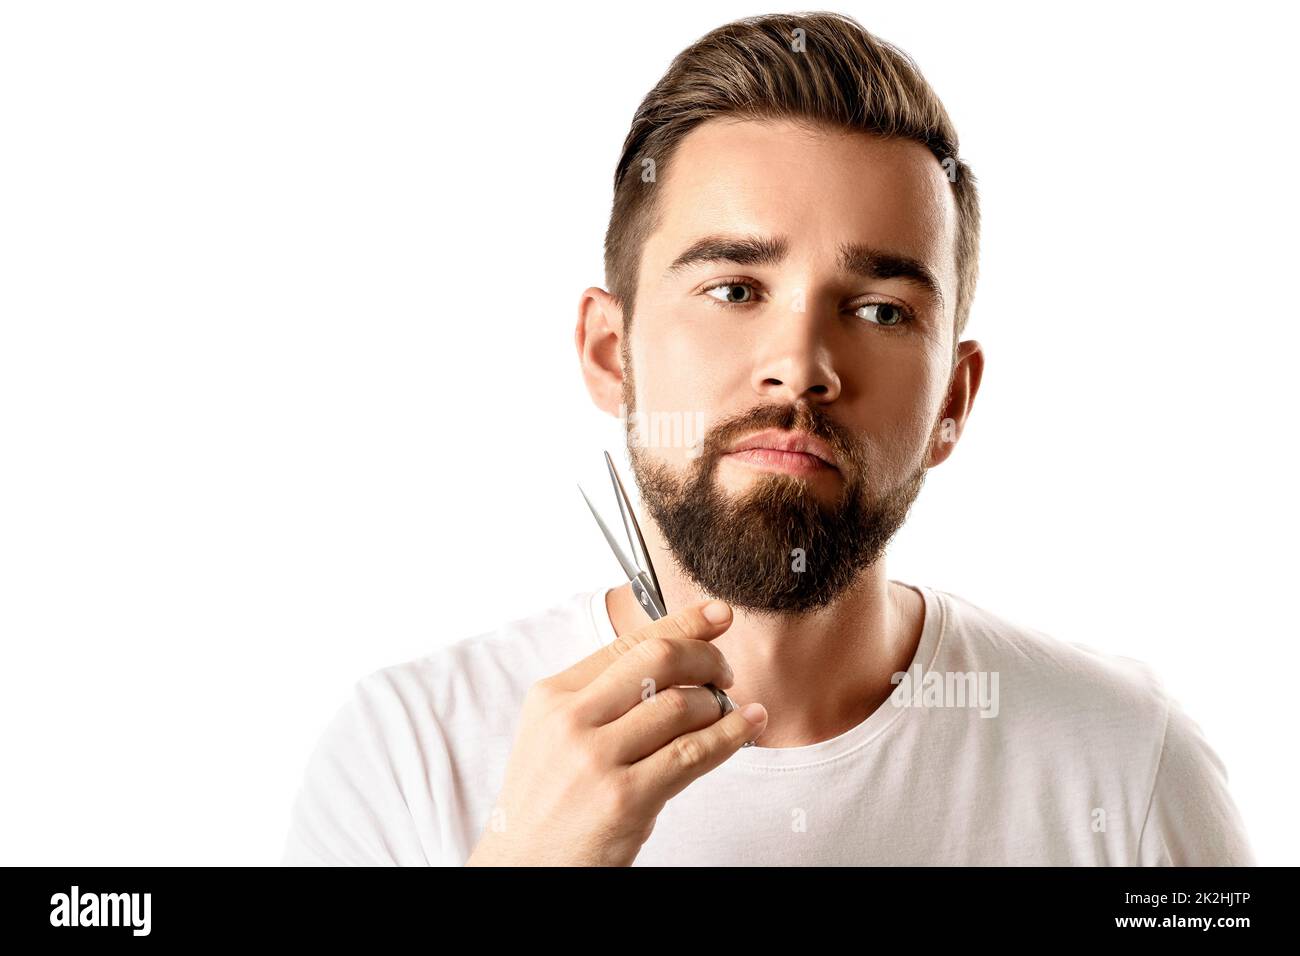 Handsome man trimming his beard with a scissors Stock Photo